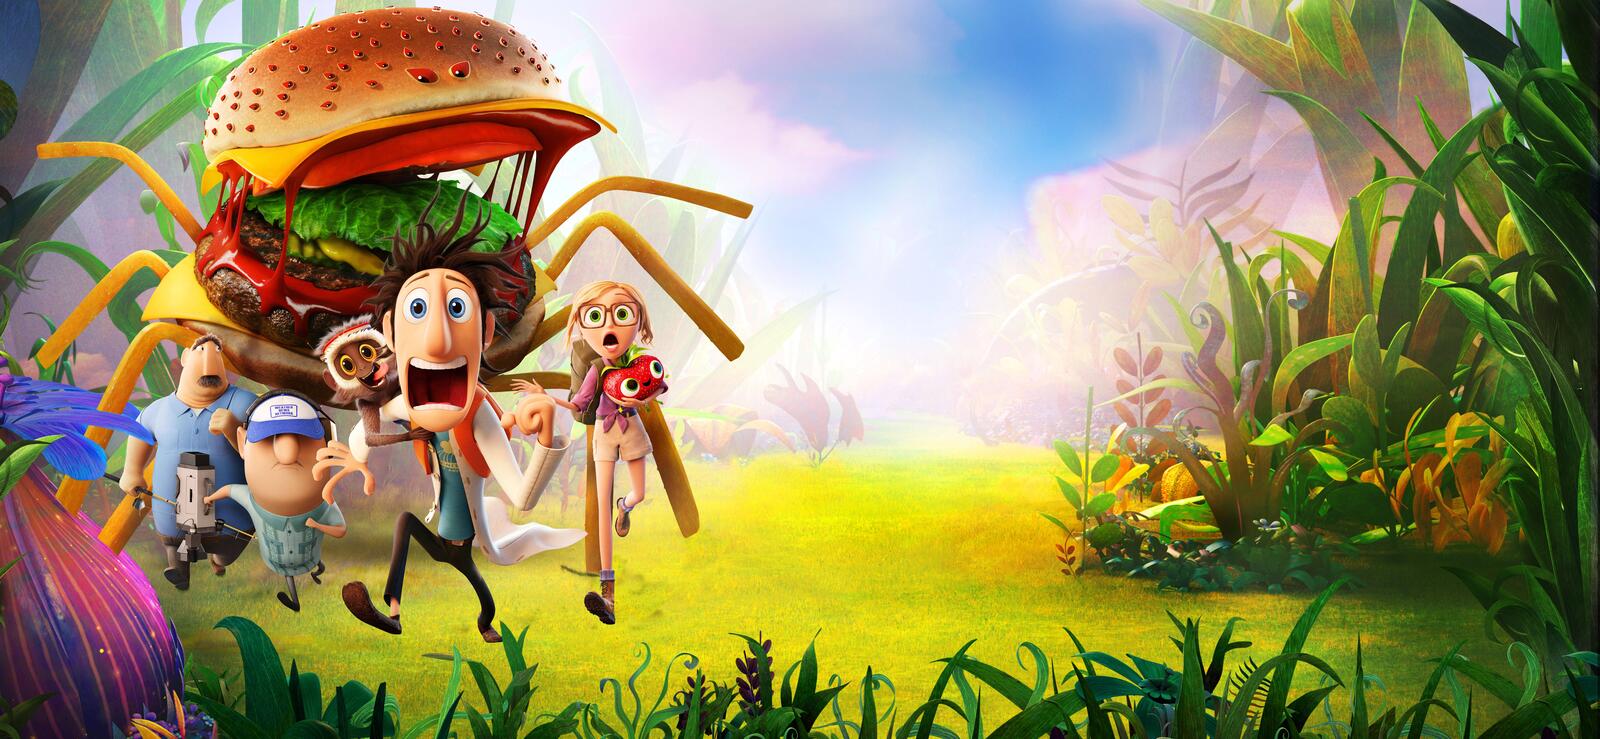 Wallpapers Cloudy 2 Revenge of GMO Cloudy with a Chance of Meatballs 2 cartoon on the desktop